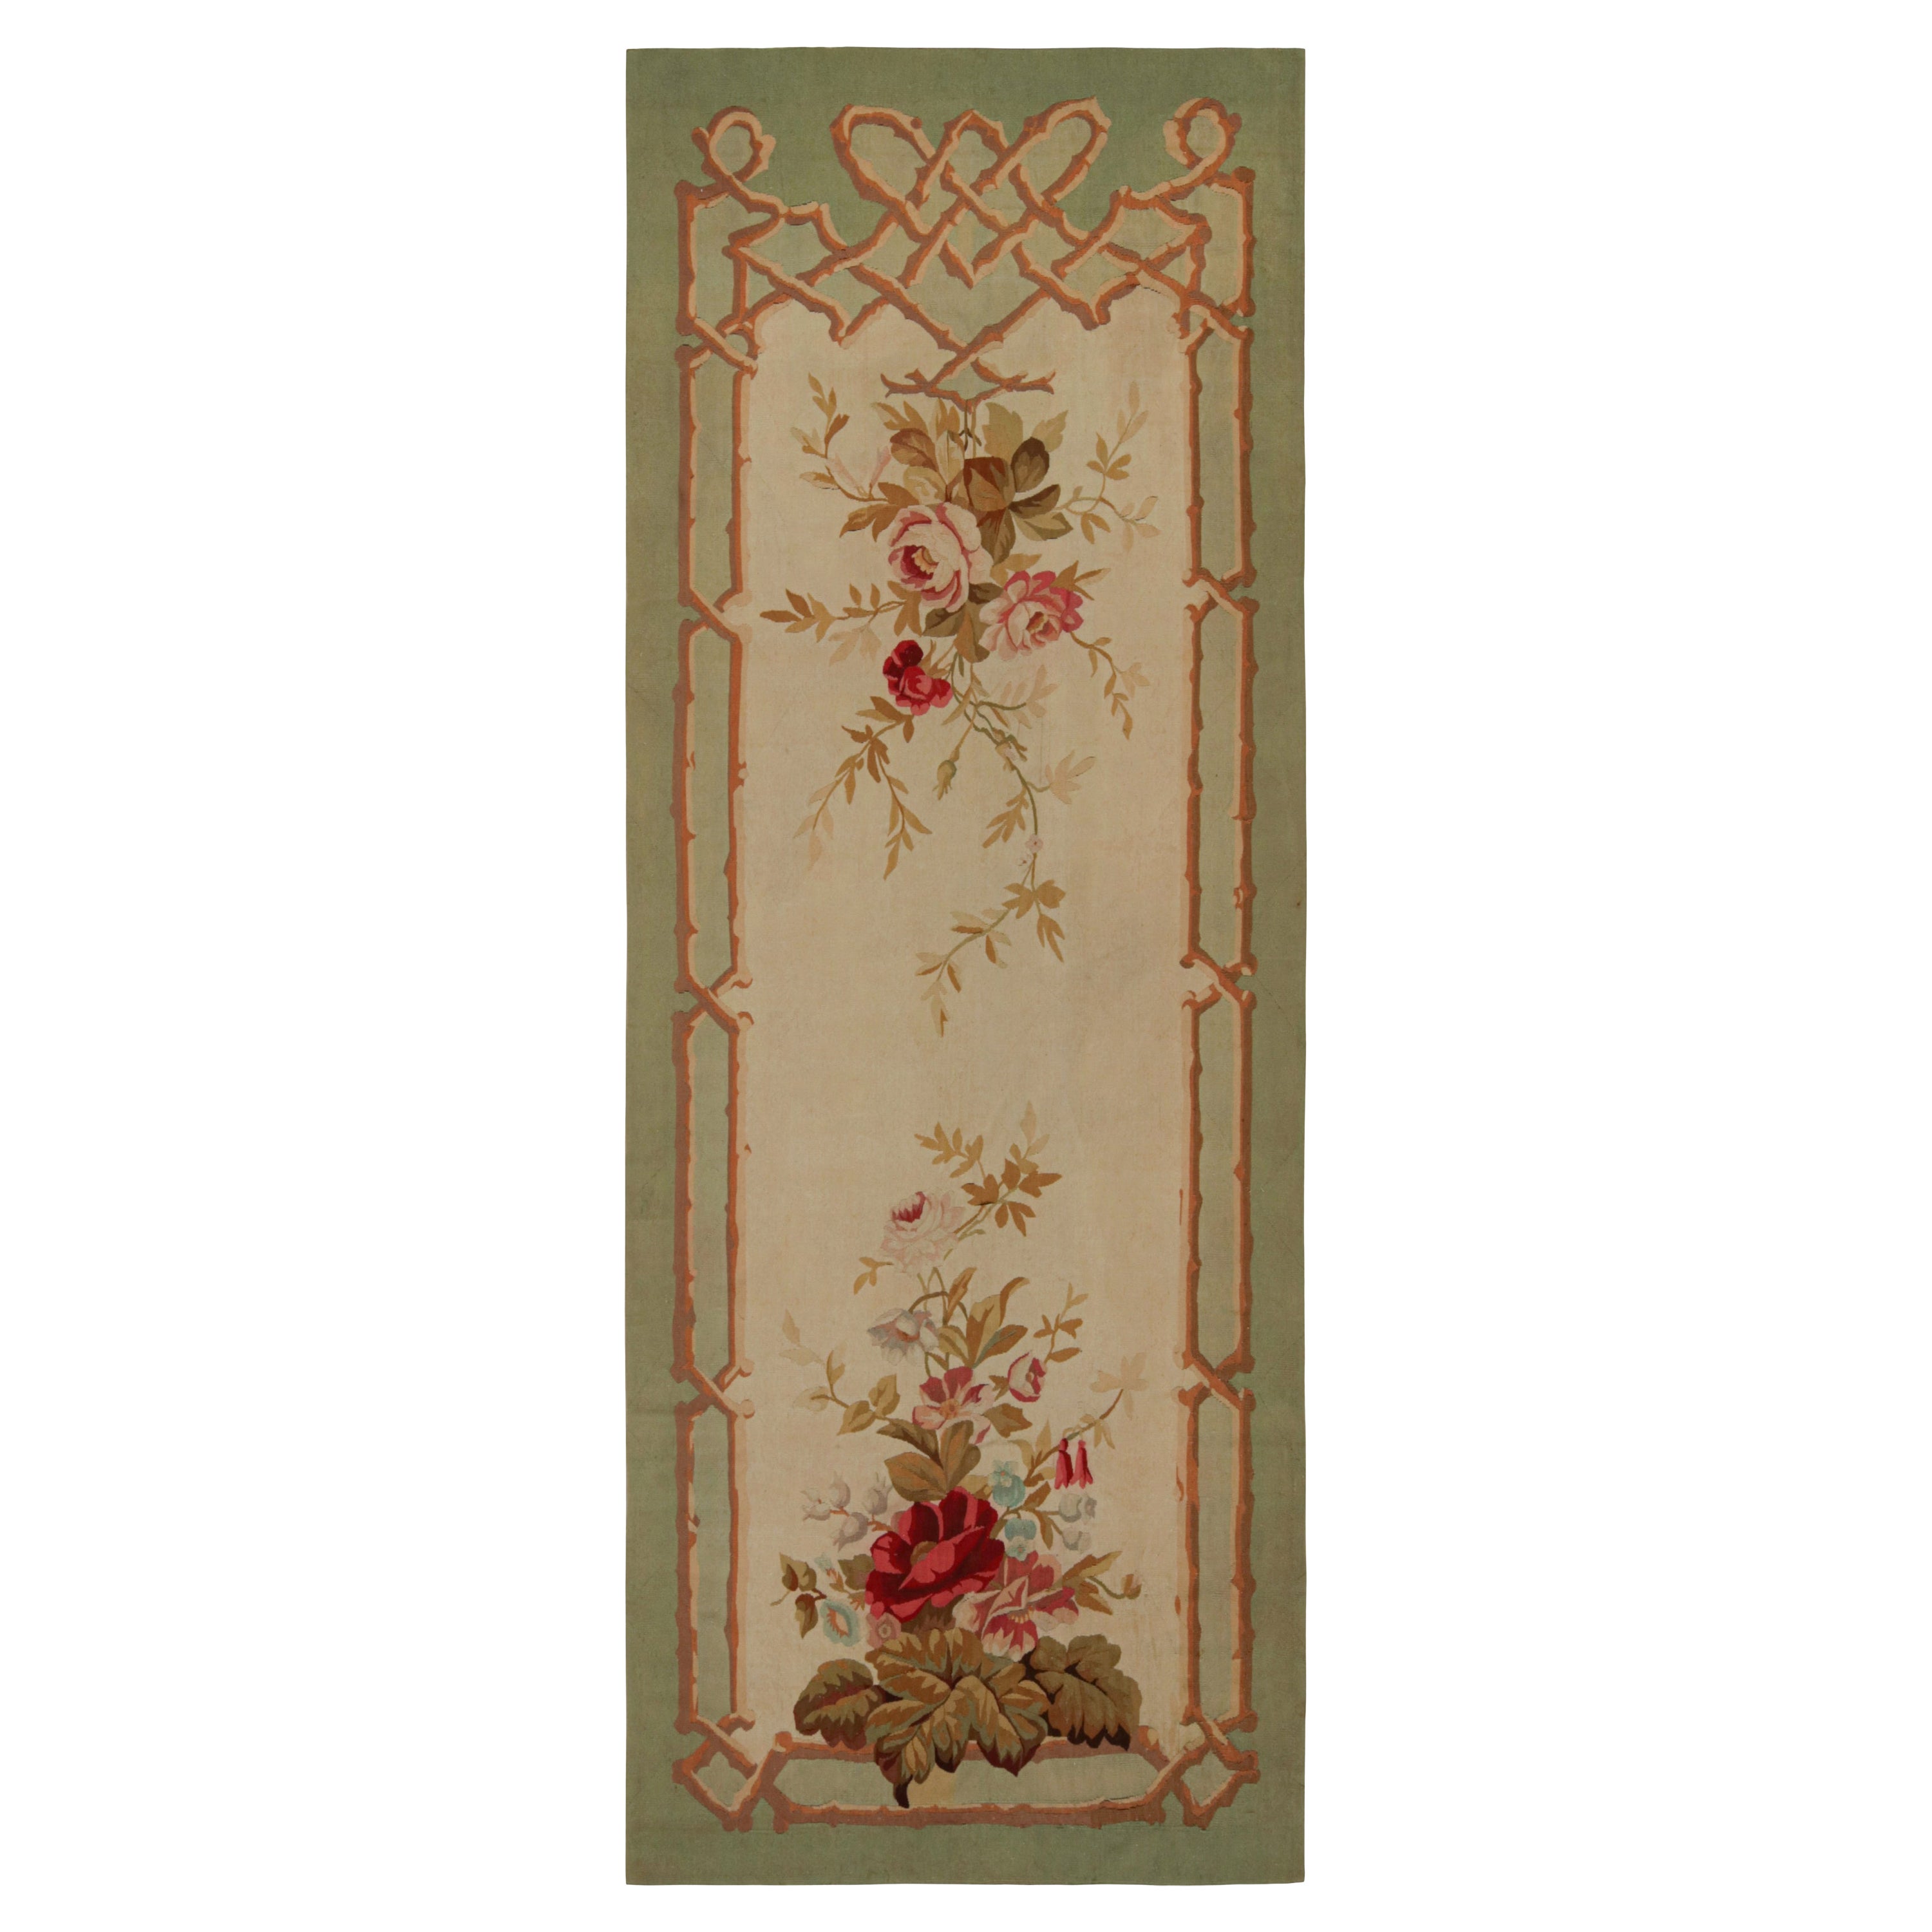 Antique Floral Aubusson Tapestry Runner Rug in Cream & Green, from Rug & Kilim For Sale